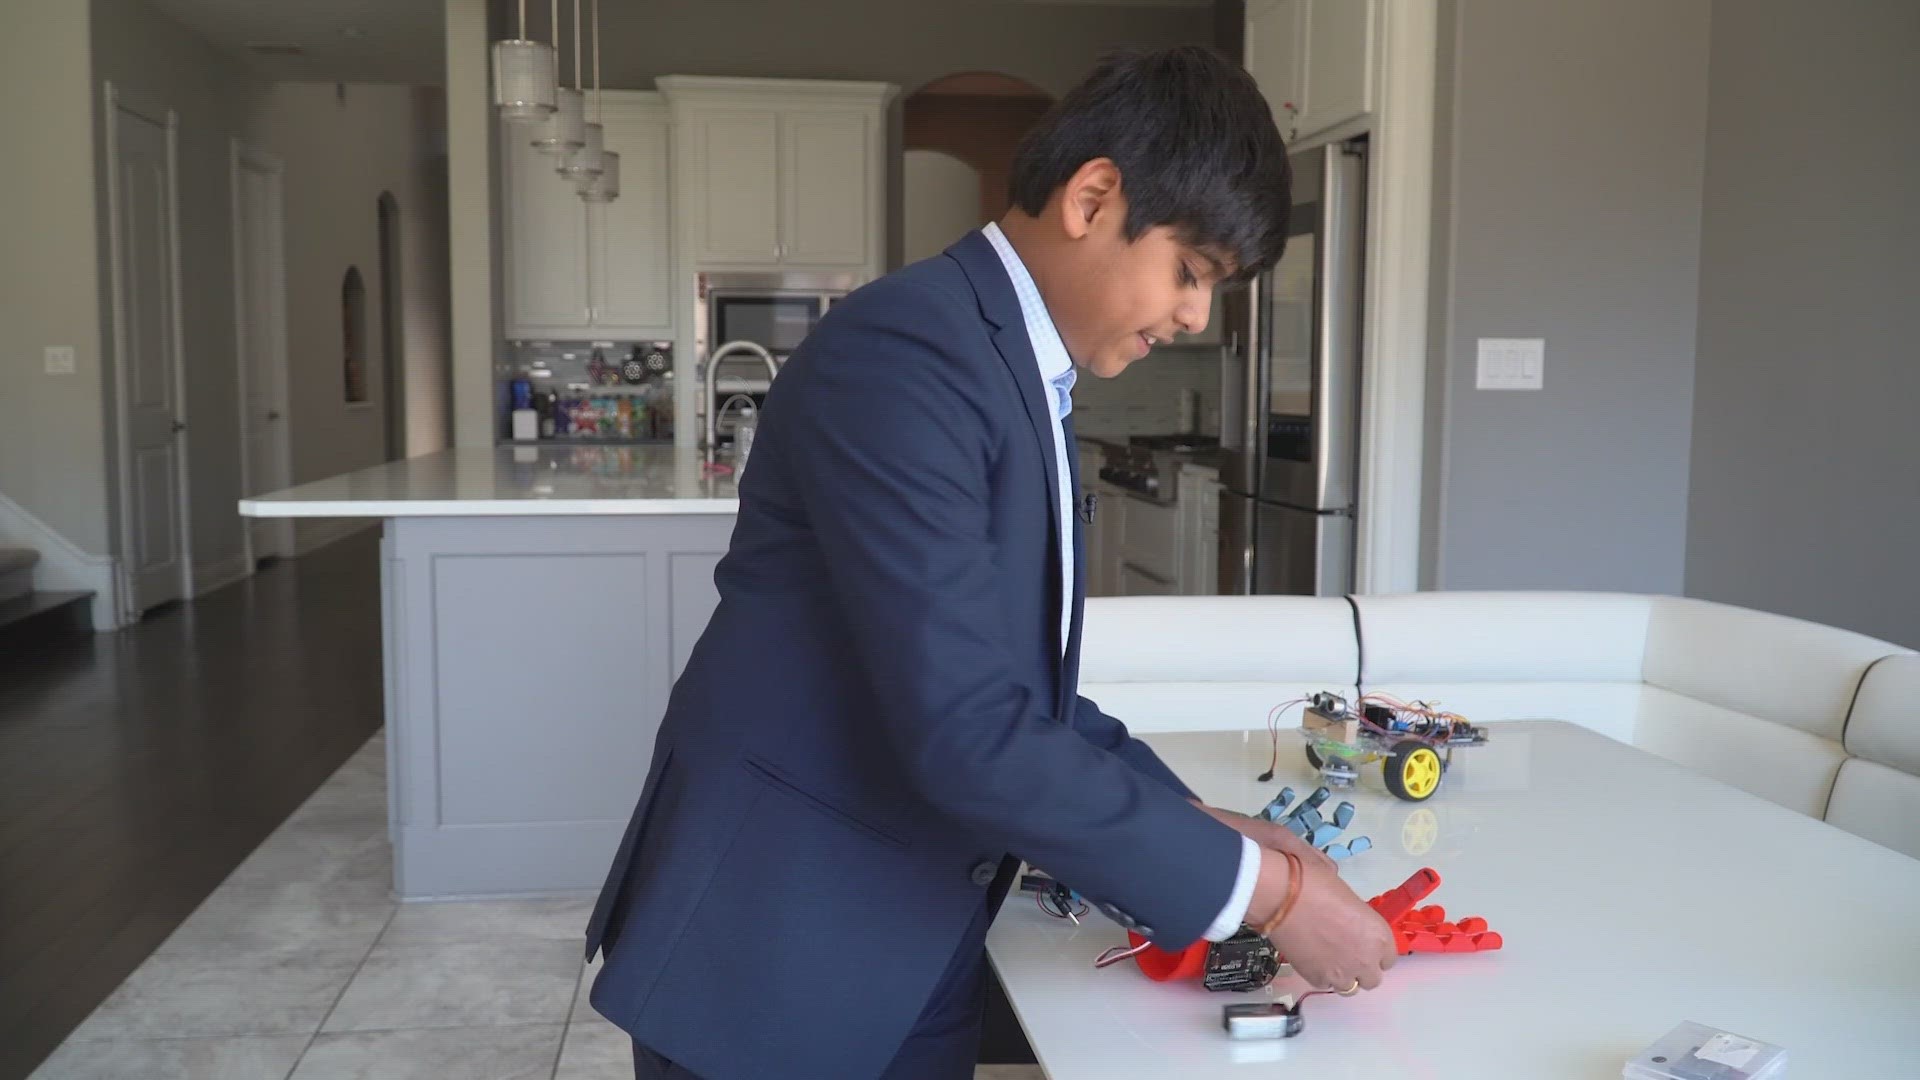 Siddarth Nandyala invented a prosthetic arm that costs $150 to make. He hopes it will help those in need who cannot afford it.